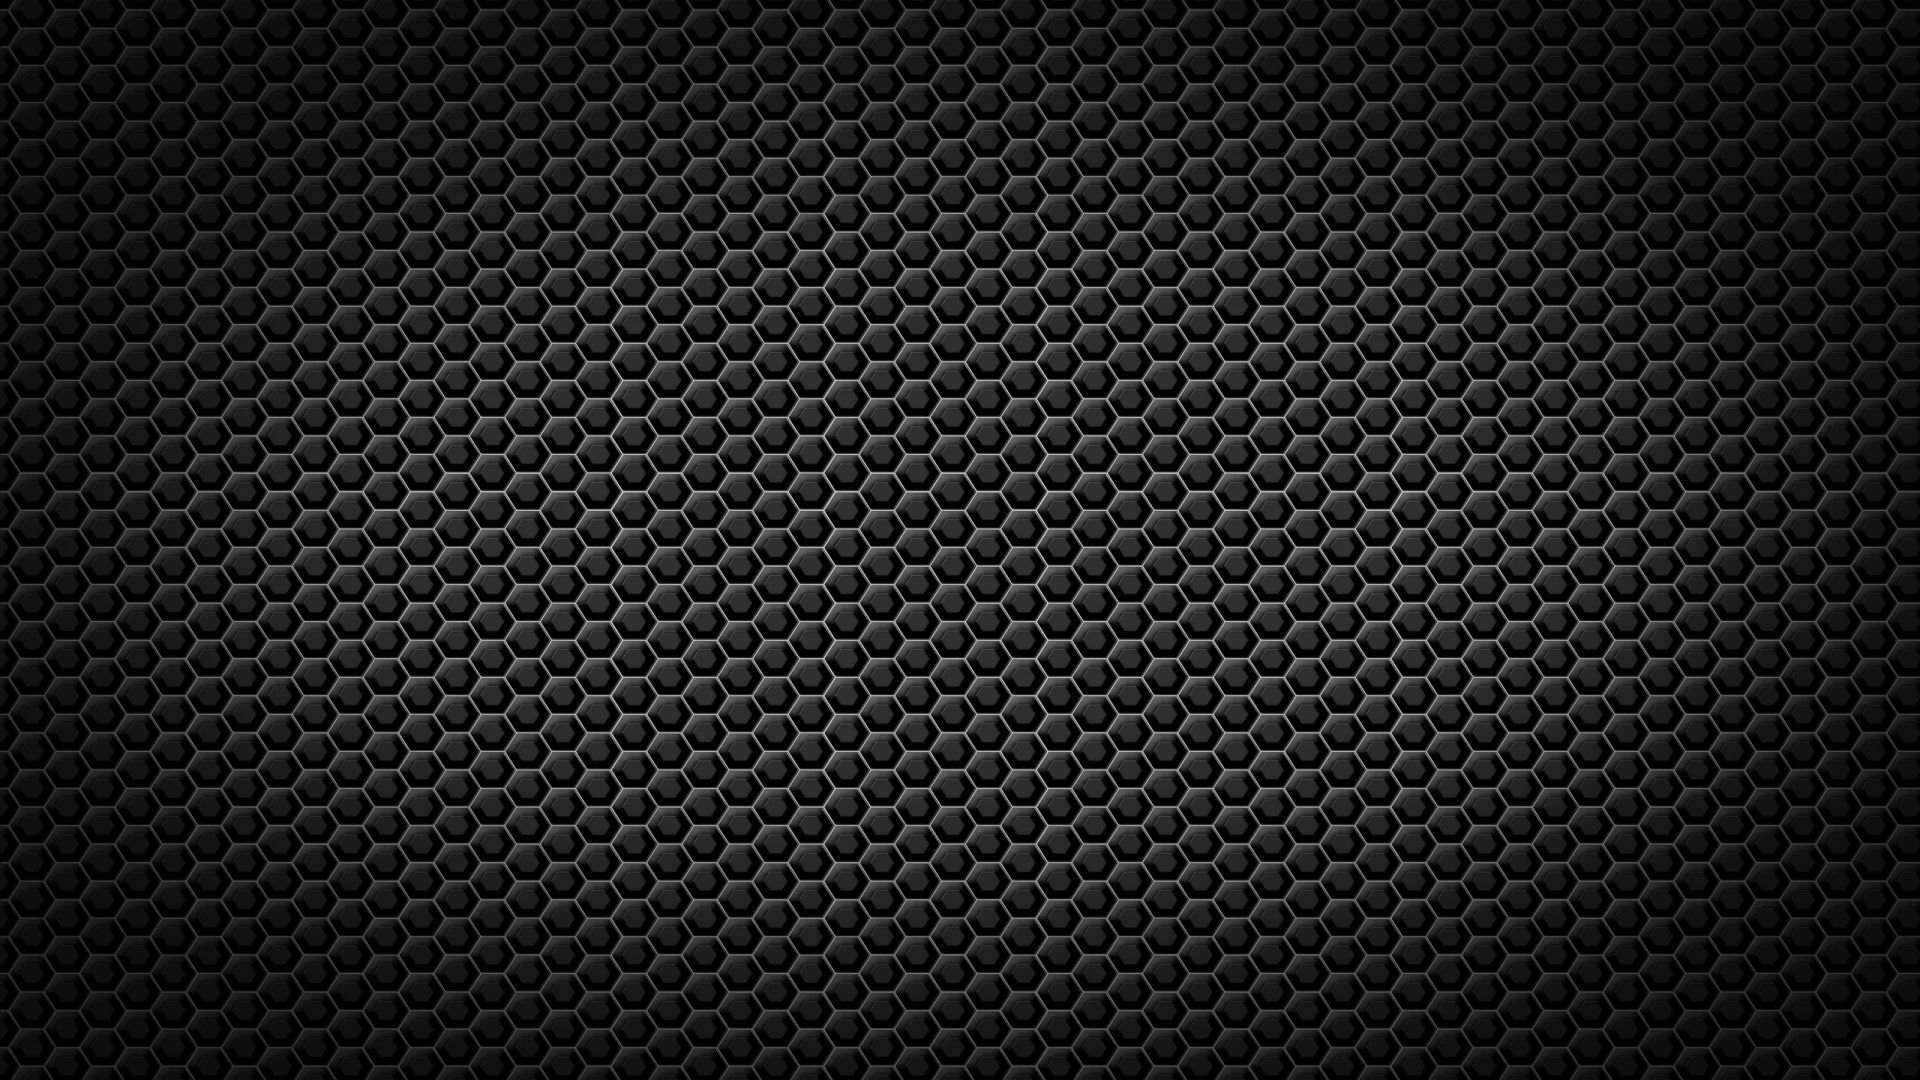 Wallpaper Full HD Widescreen Awesome X